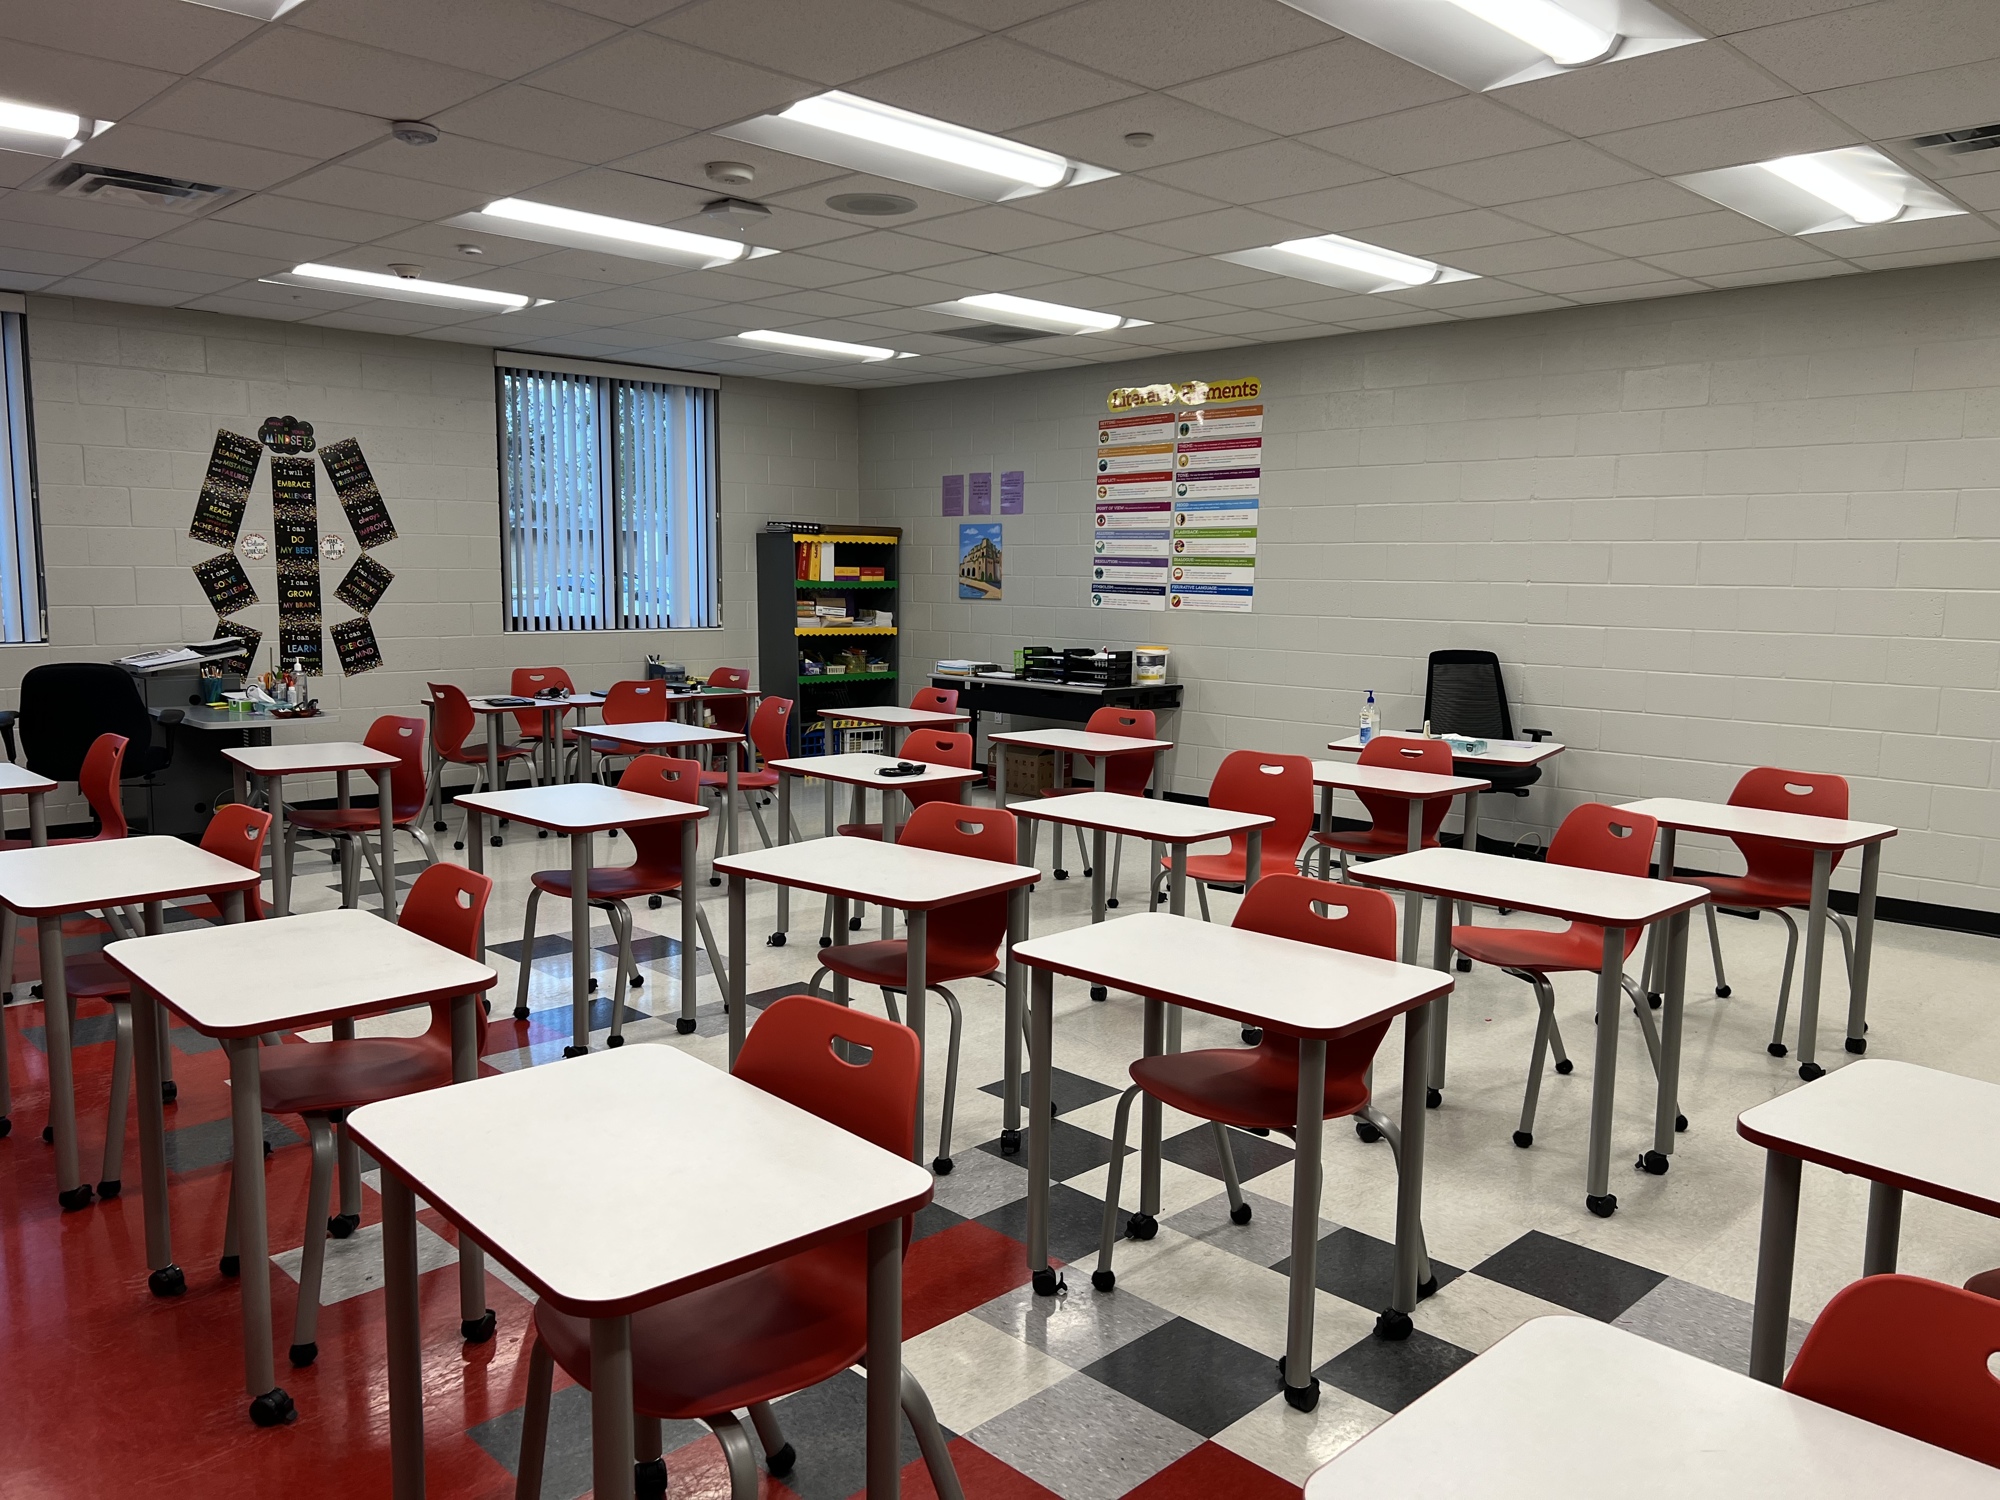 Teachers love the new classrooms in the addition. Building 2 has the most recently renovated classrooms. Work on Building 3, which has the gym, will progress over the summer.